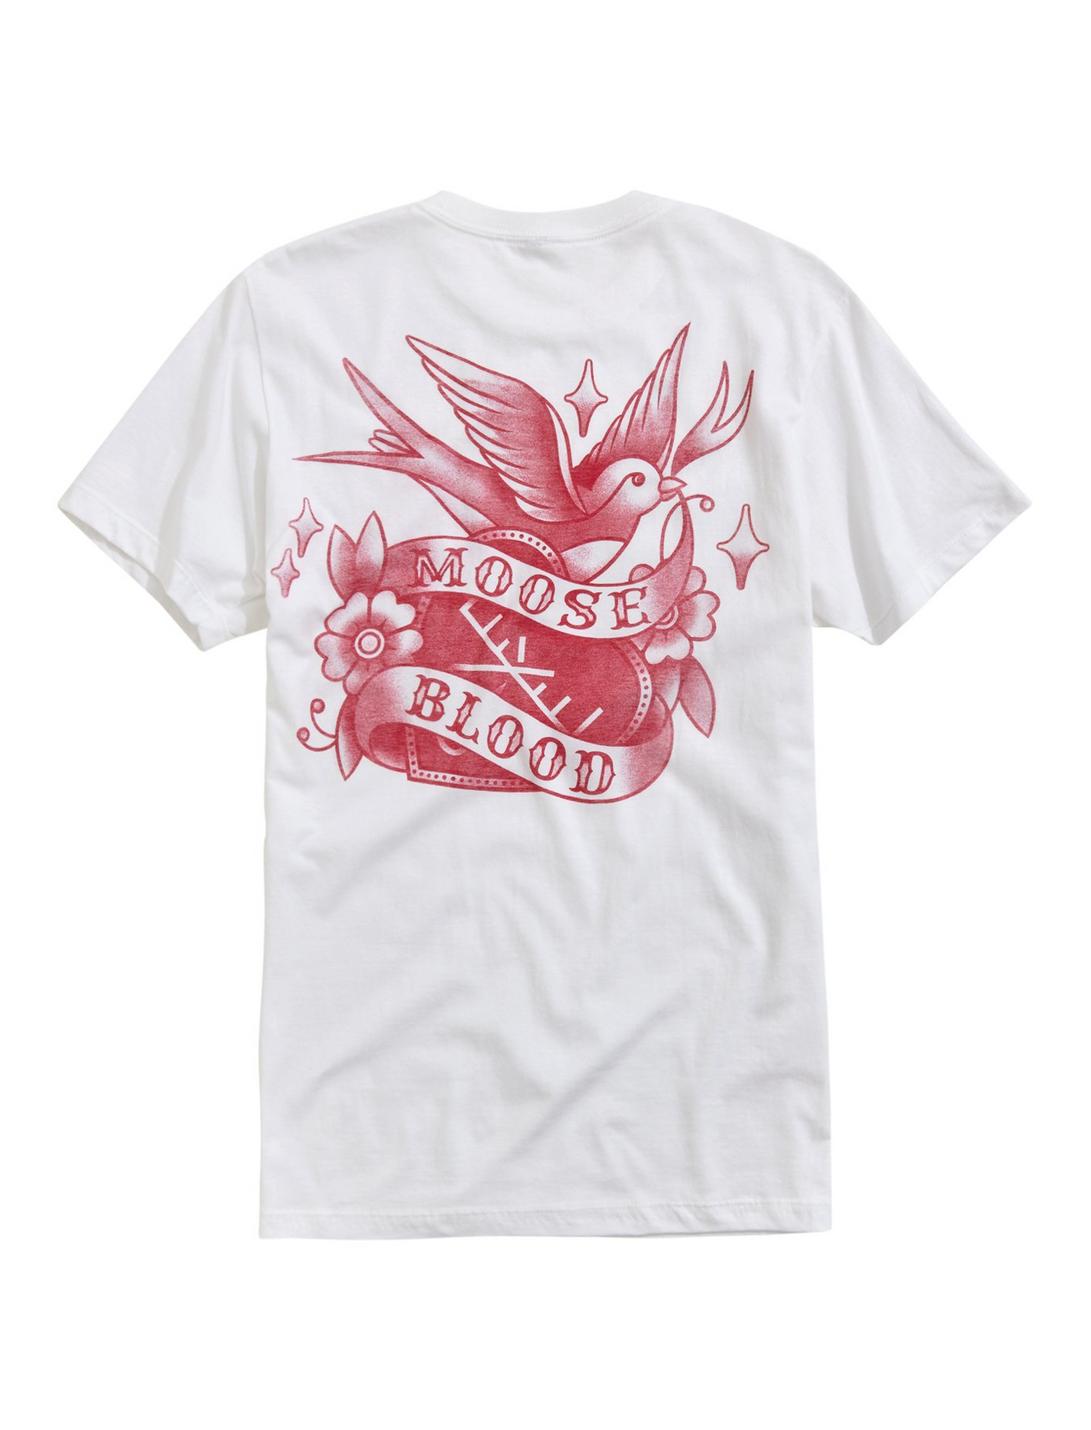 Moose Blood Sparrow Heart Tattoo T-Shirt, WHITE, hi-res